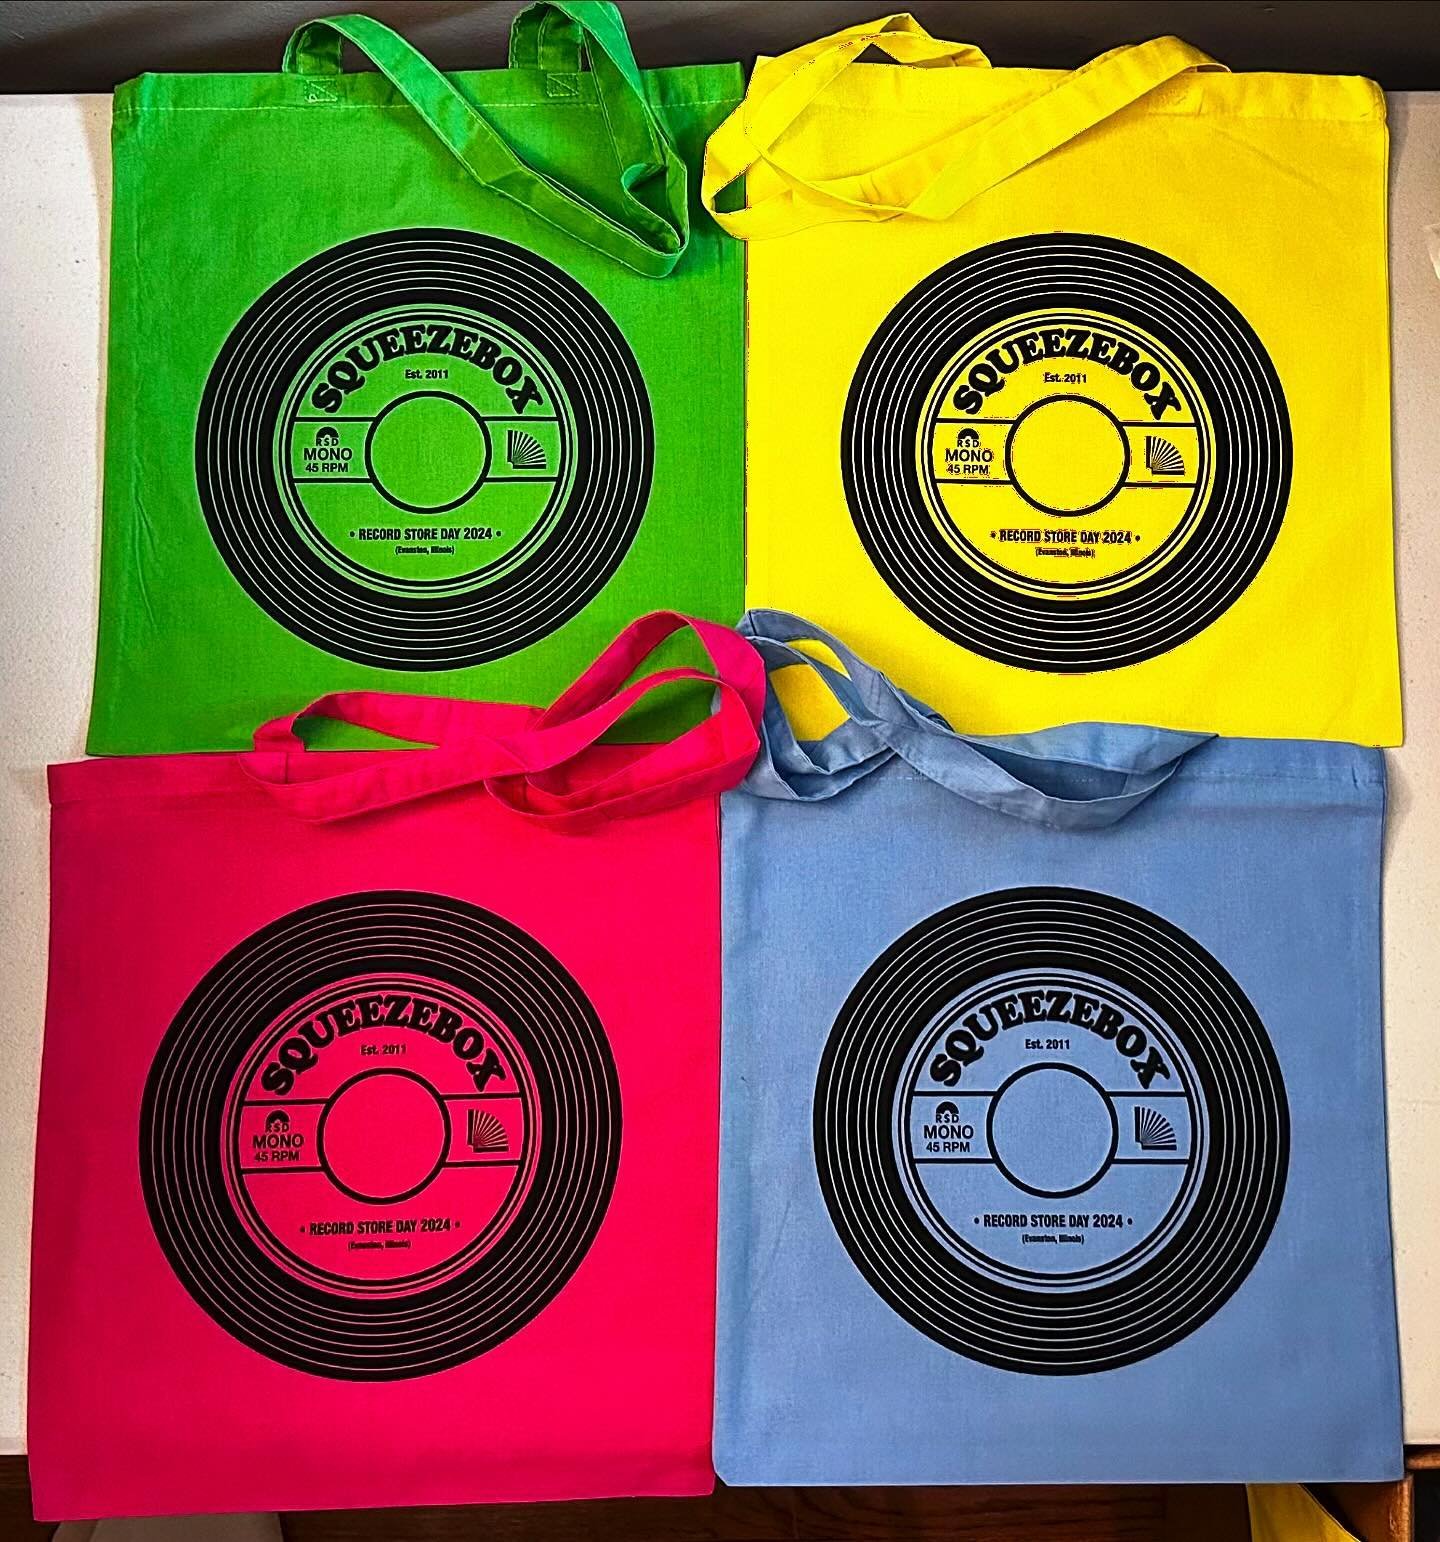 @squeezeboxbooks LP Bags
Record Store Day 2024 
@recordstoredayus @recordstoreday 
.
First 40 (41, as I won&rsquo;t take one 😆) people in line for Saturday&rsquo;s RSD at Squeezebox receive a free record sack !  Salute to Tim &amp; The Gang !!! See 